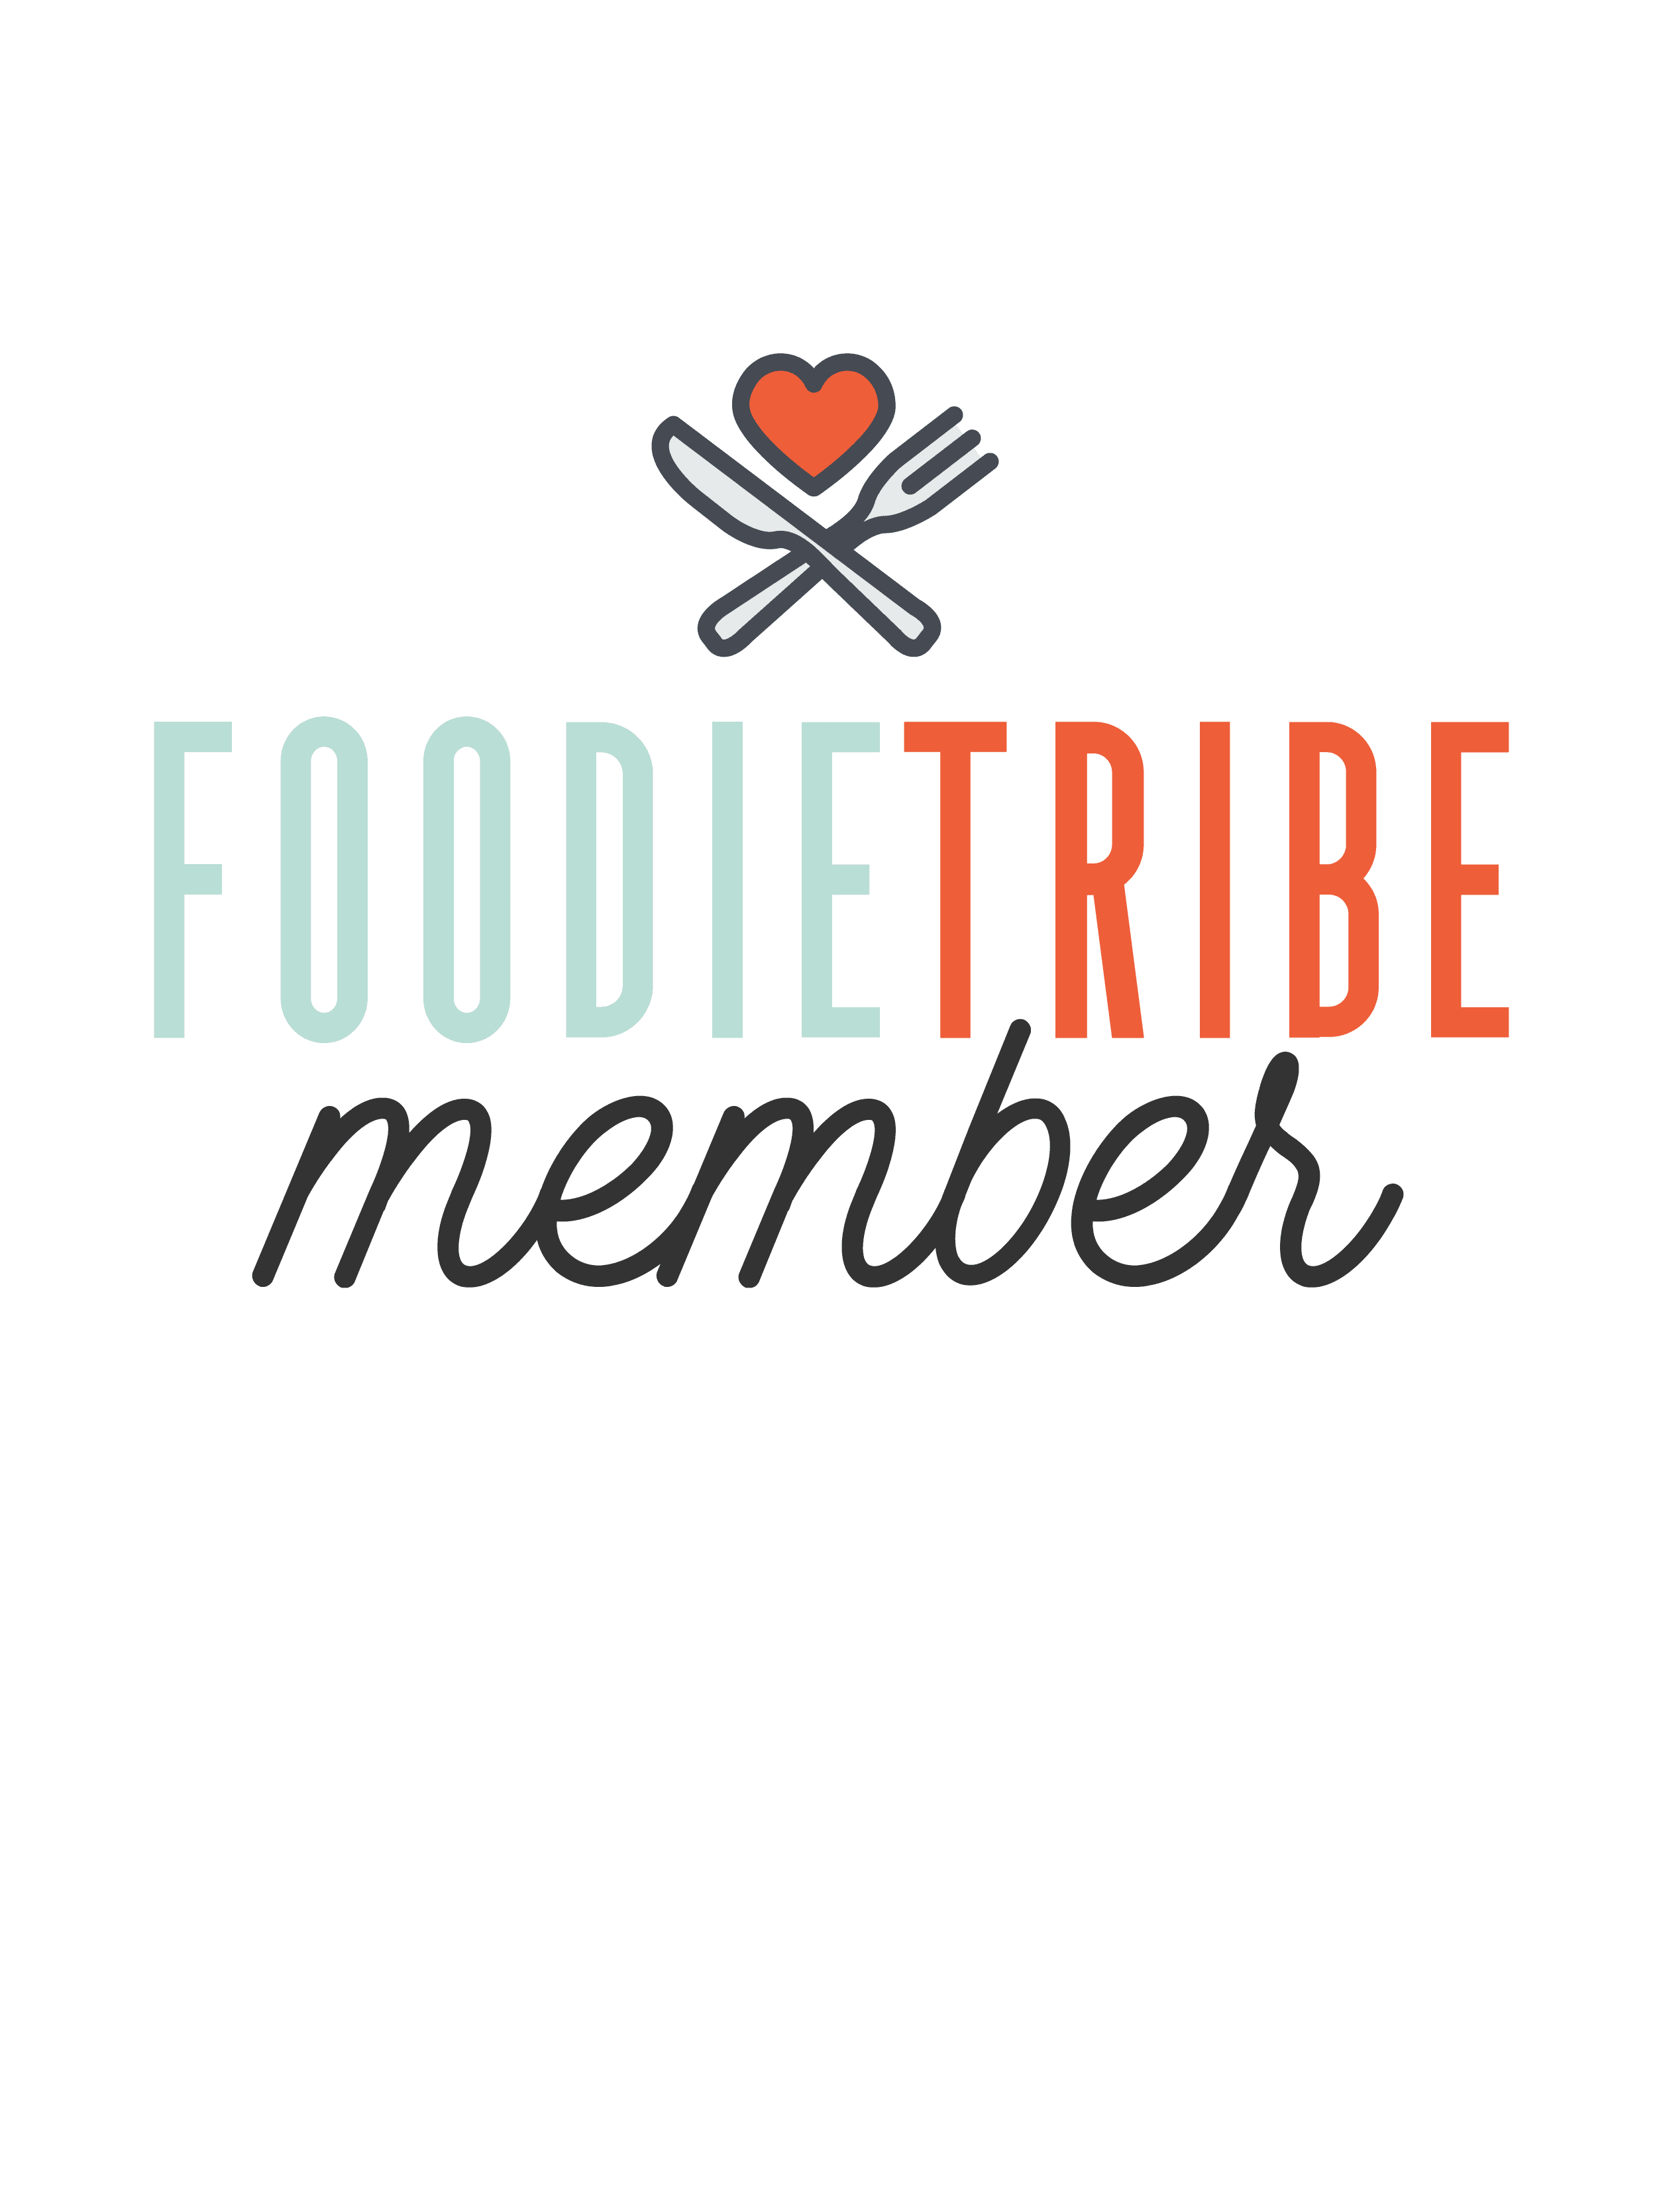 image with the words "foodie tribe member".